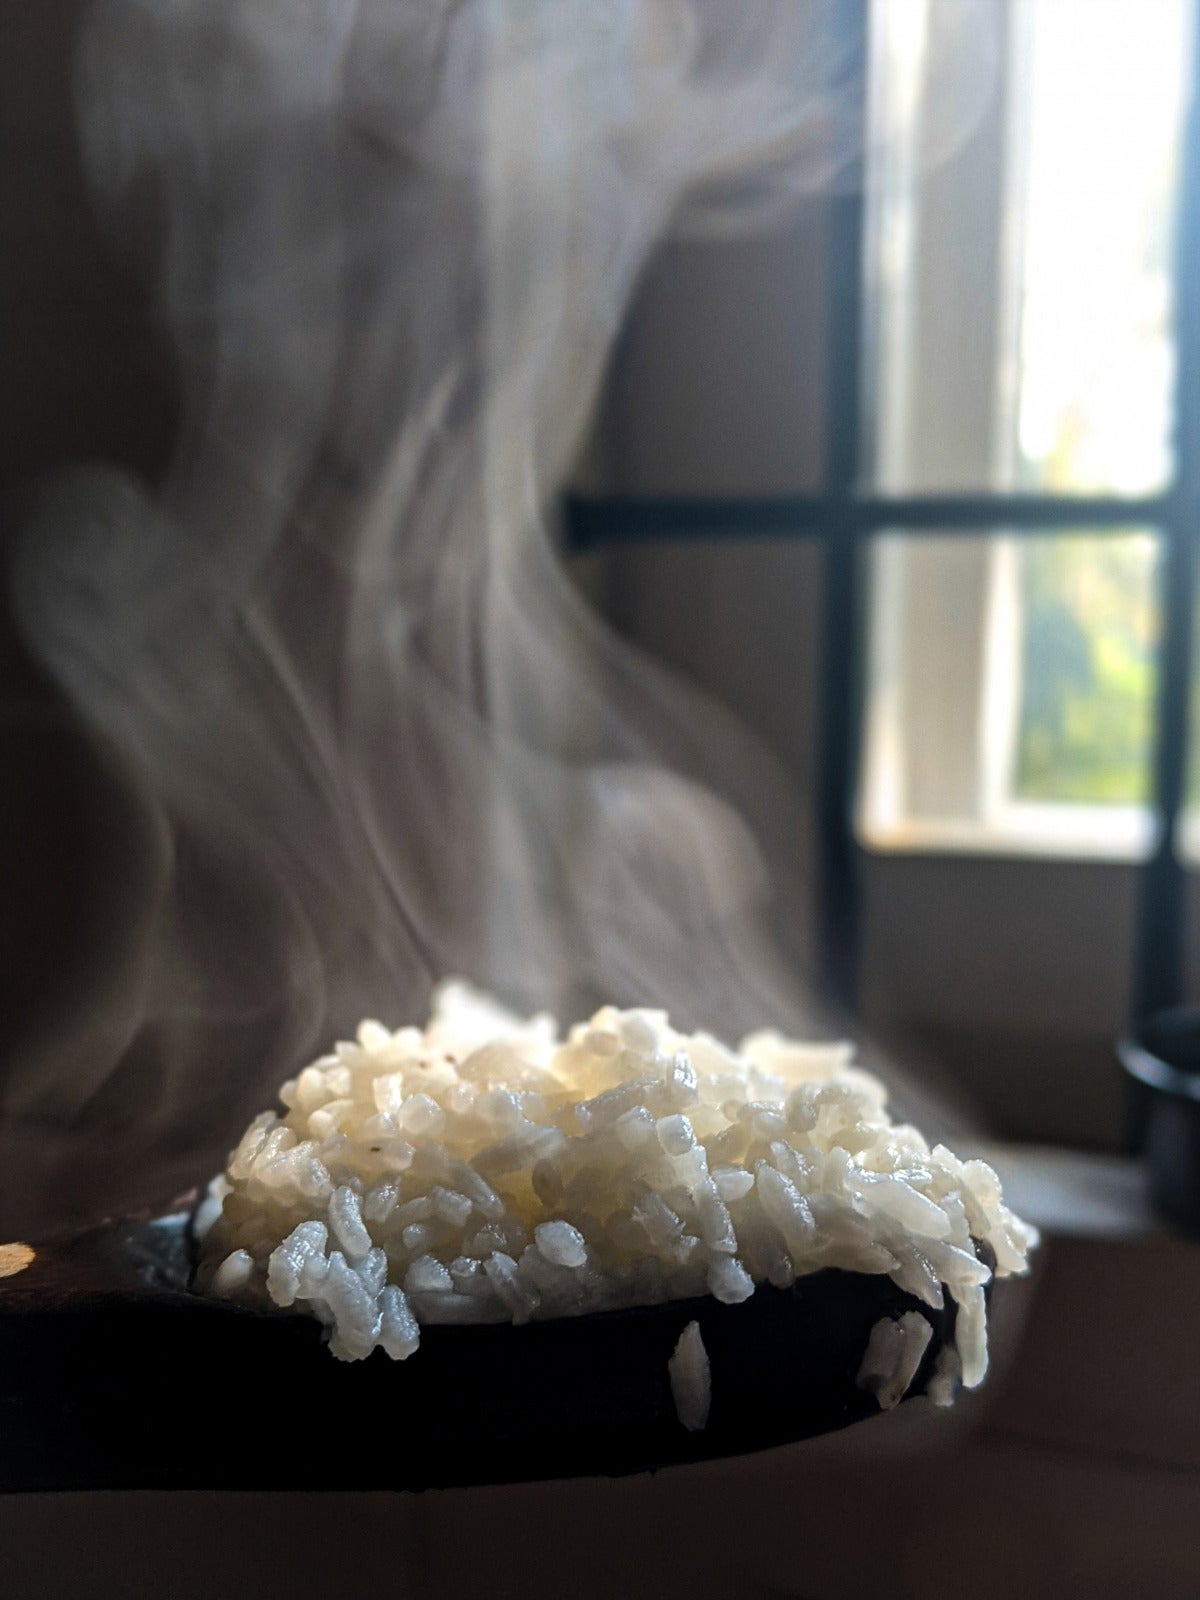 steaming hot white rice on a spoon next to a window